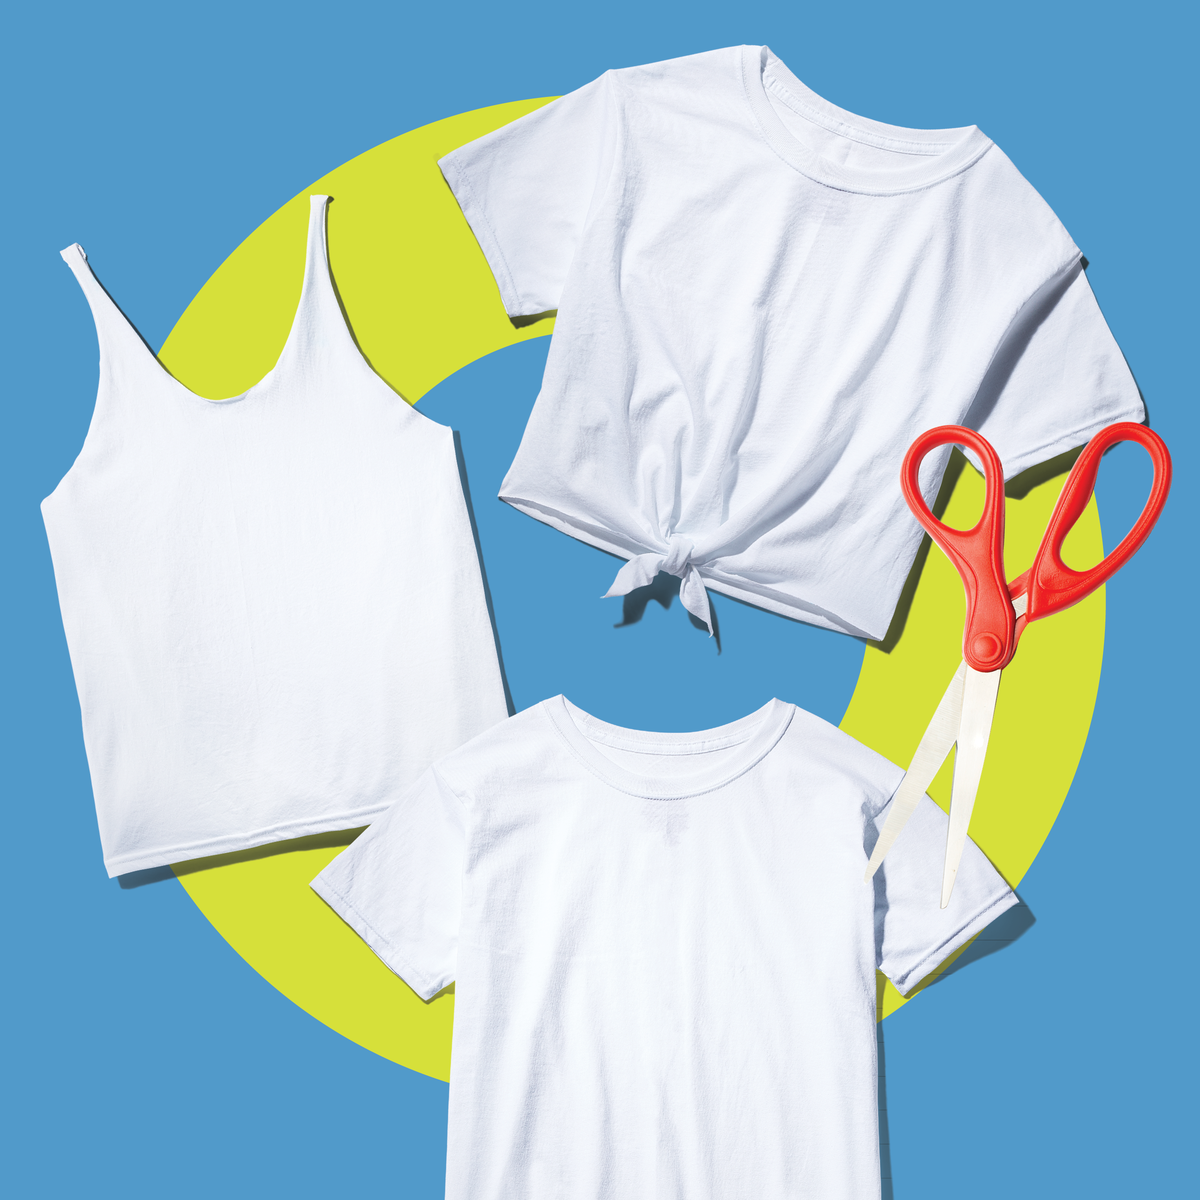 How To Cut A T-Shirt Into A Cool Workout Top – 5 Ways Cut Tees